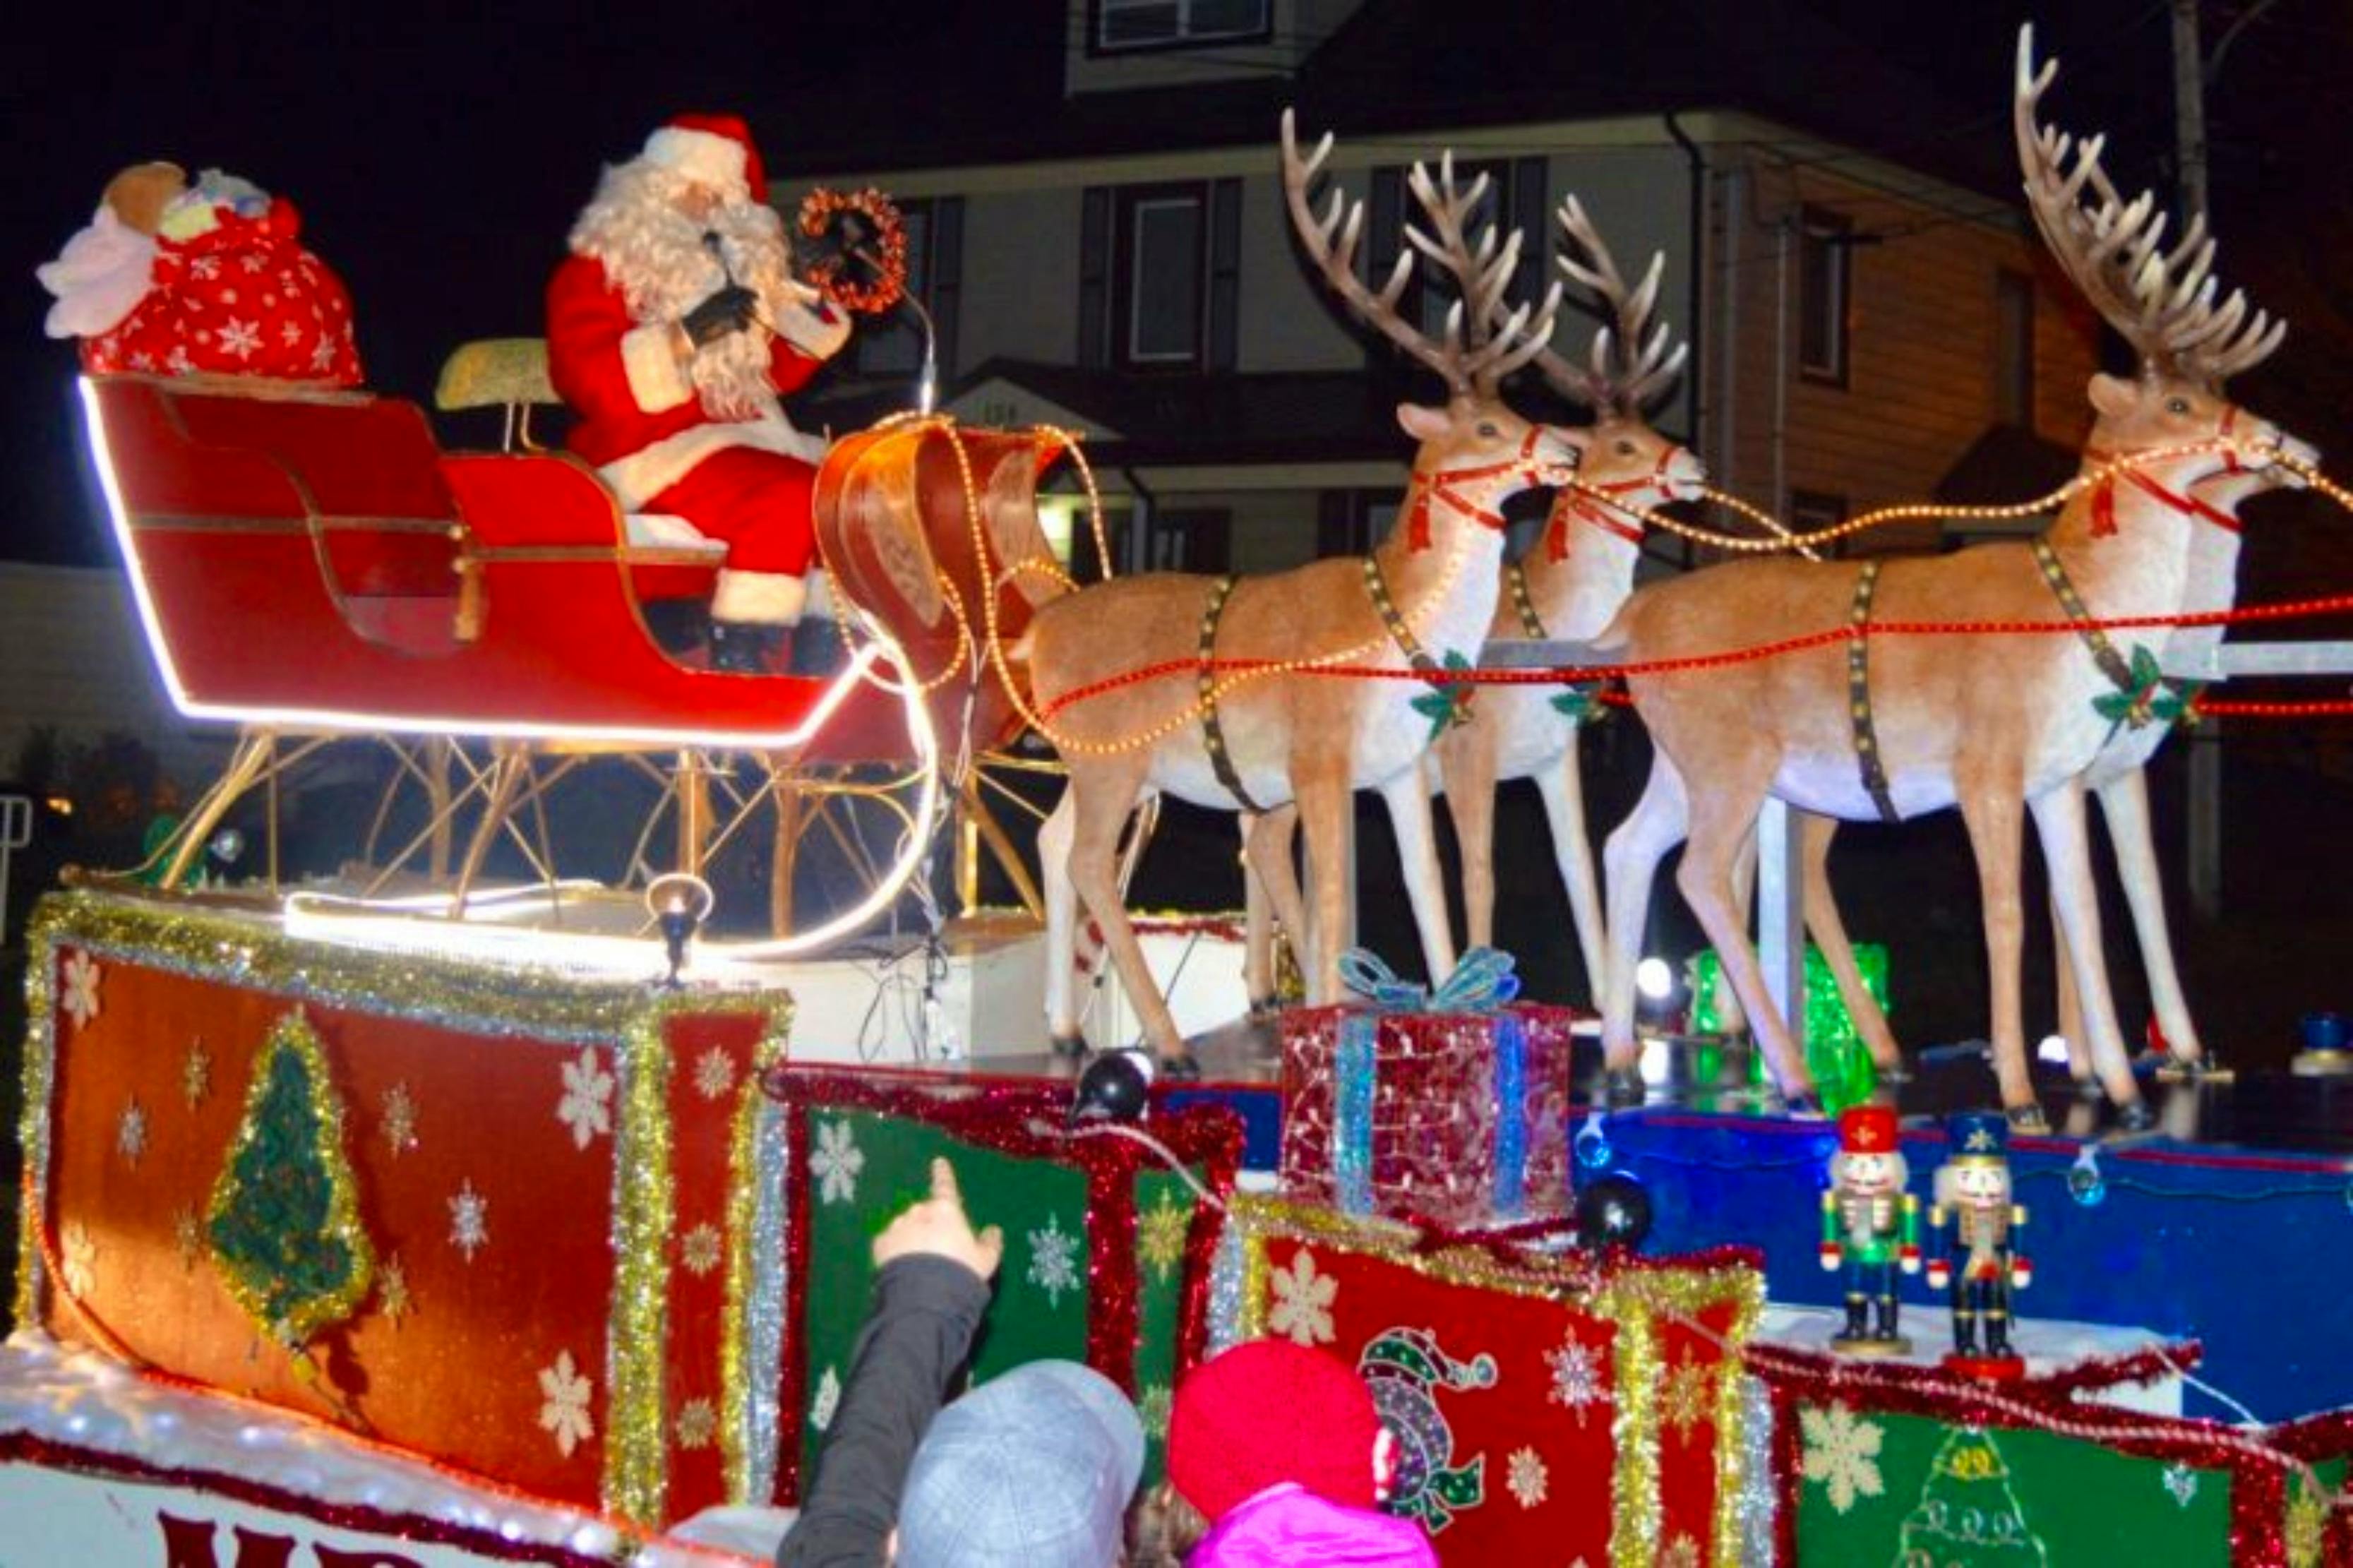 North Sydney fire department gets OK to hold moving Santa Claus